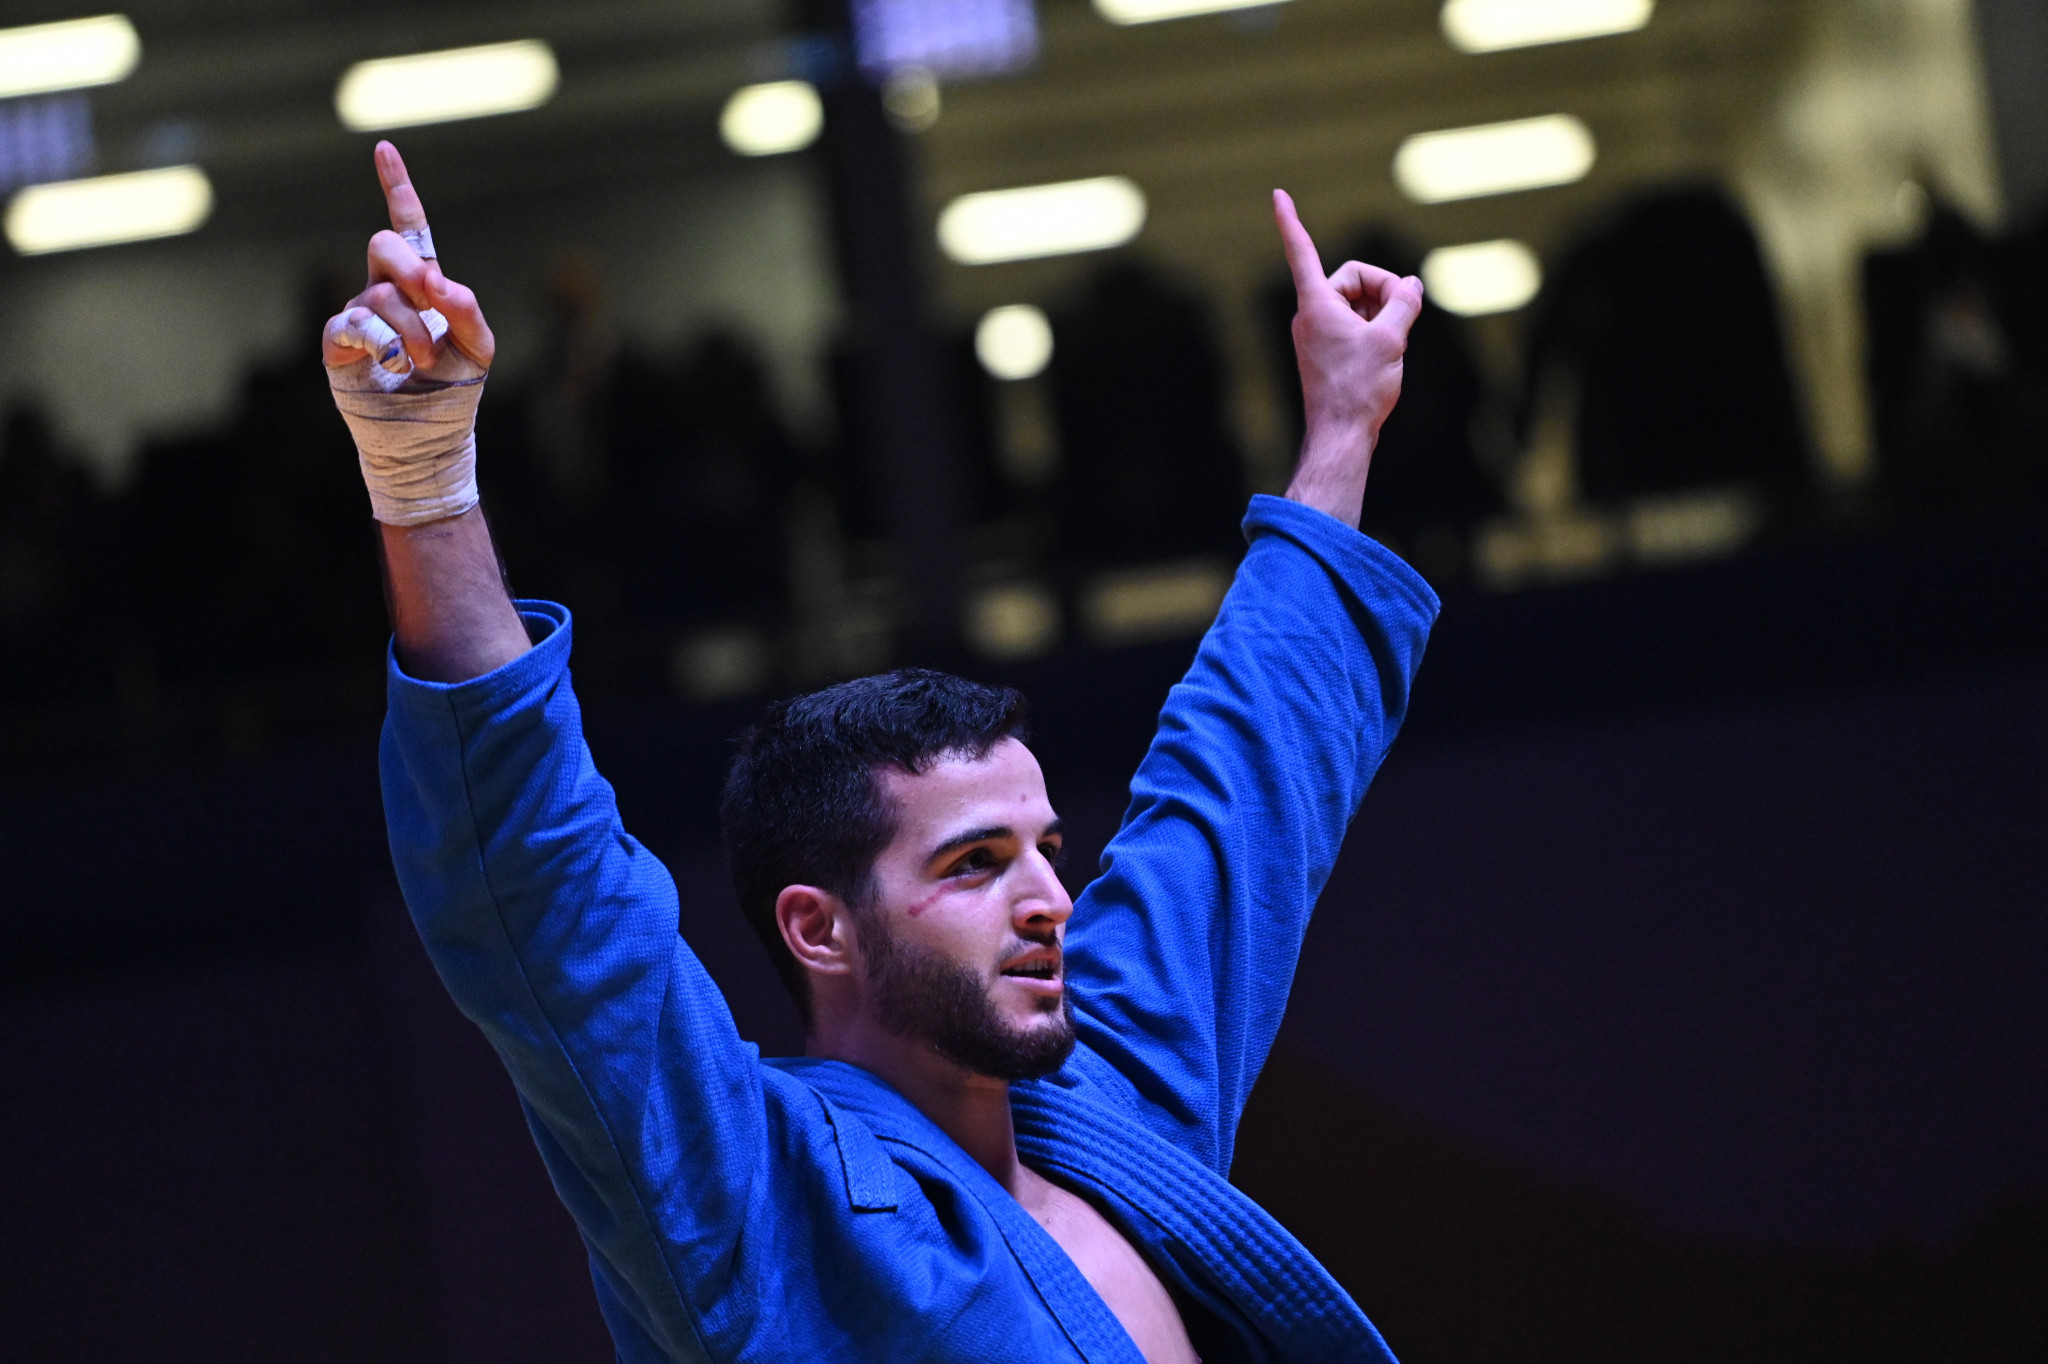 FIAS athletes won the opening bout of the finals thanks to a late submission from Shamil Zilfikarov ©FIAS